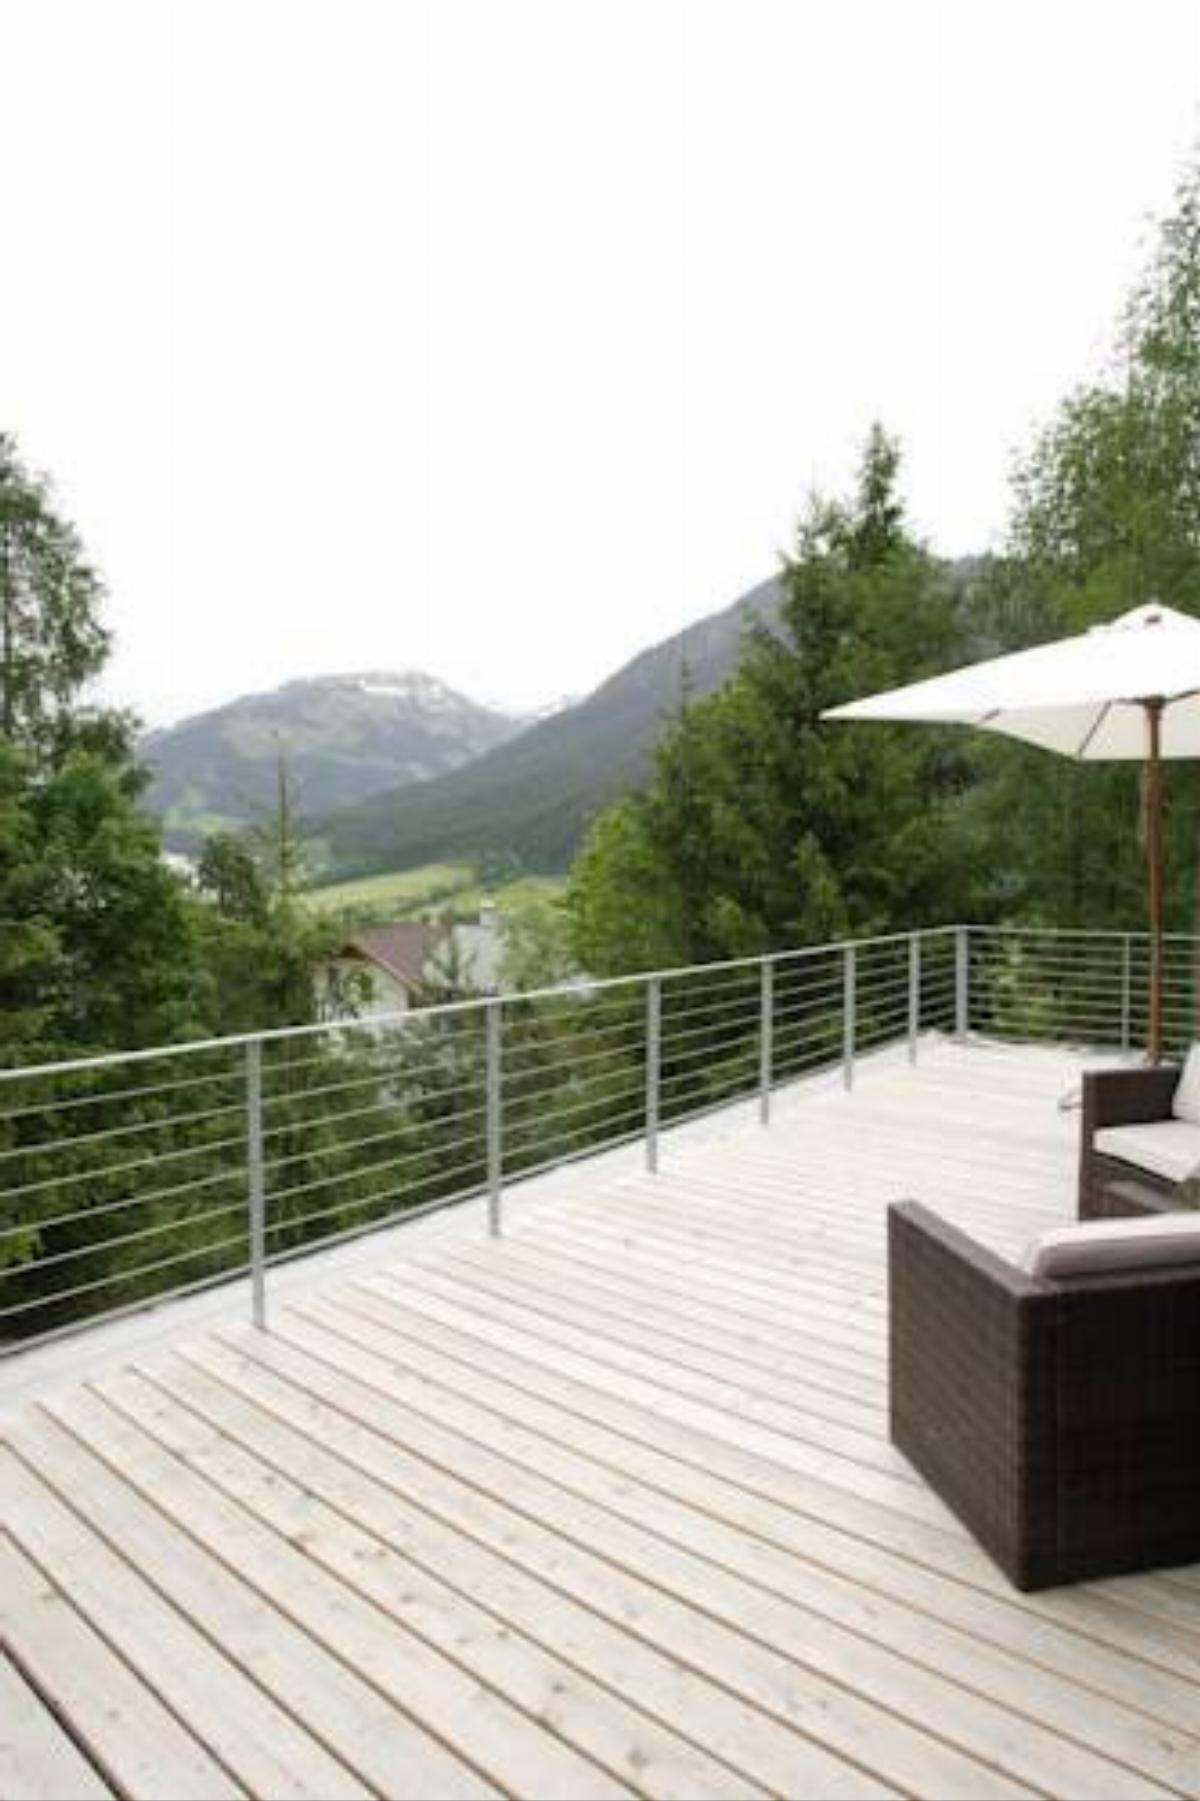 Apartment Stylebox 1 & 2 by Apartment Managers Hotel Kirchberg in Tirol Austria